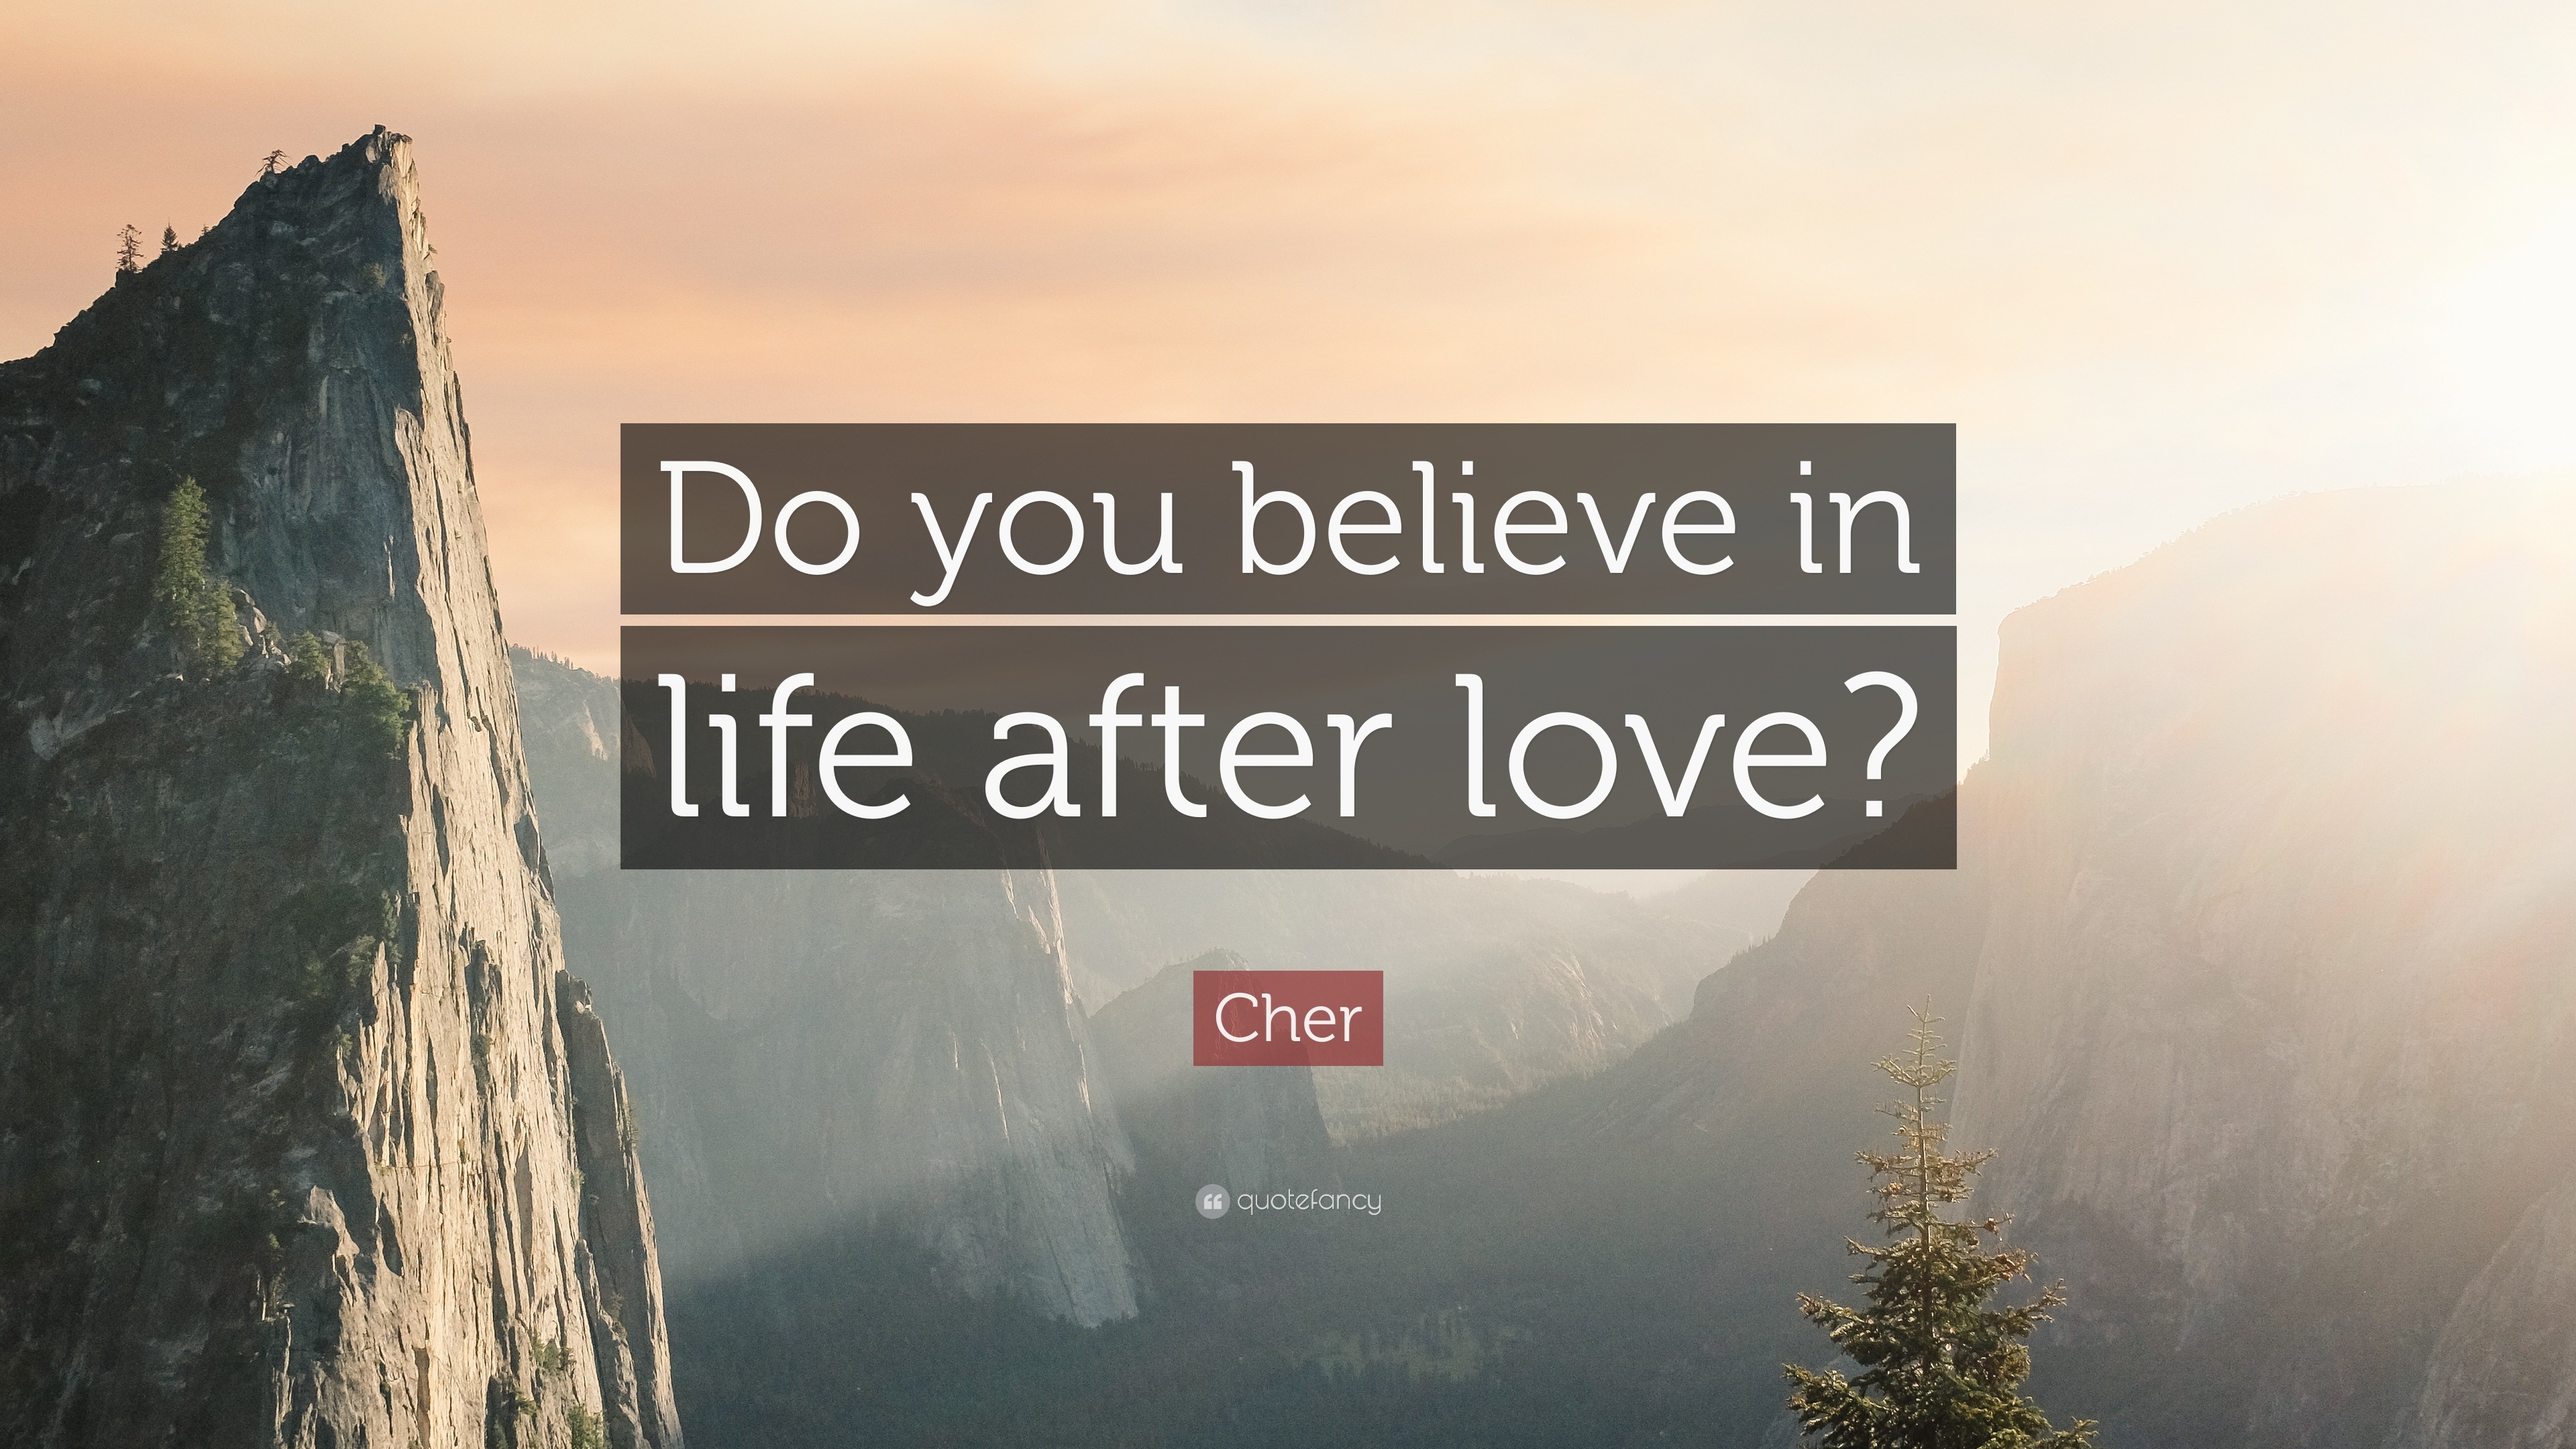 Cher Quote “Do you believe in life after love ”